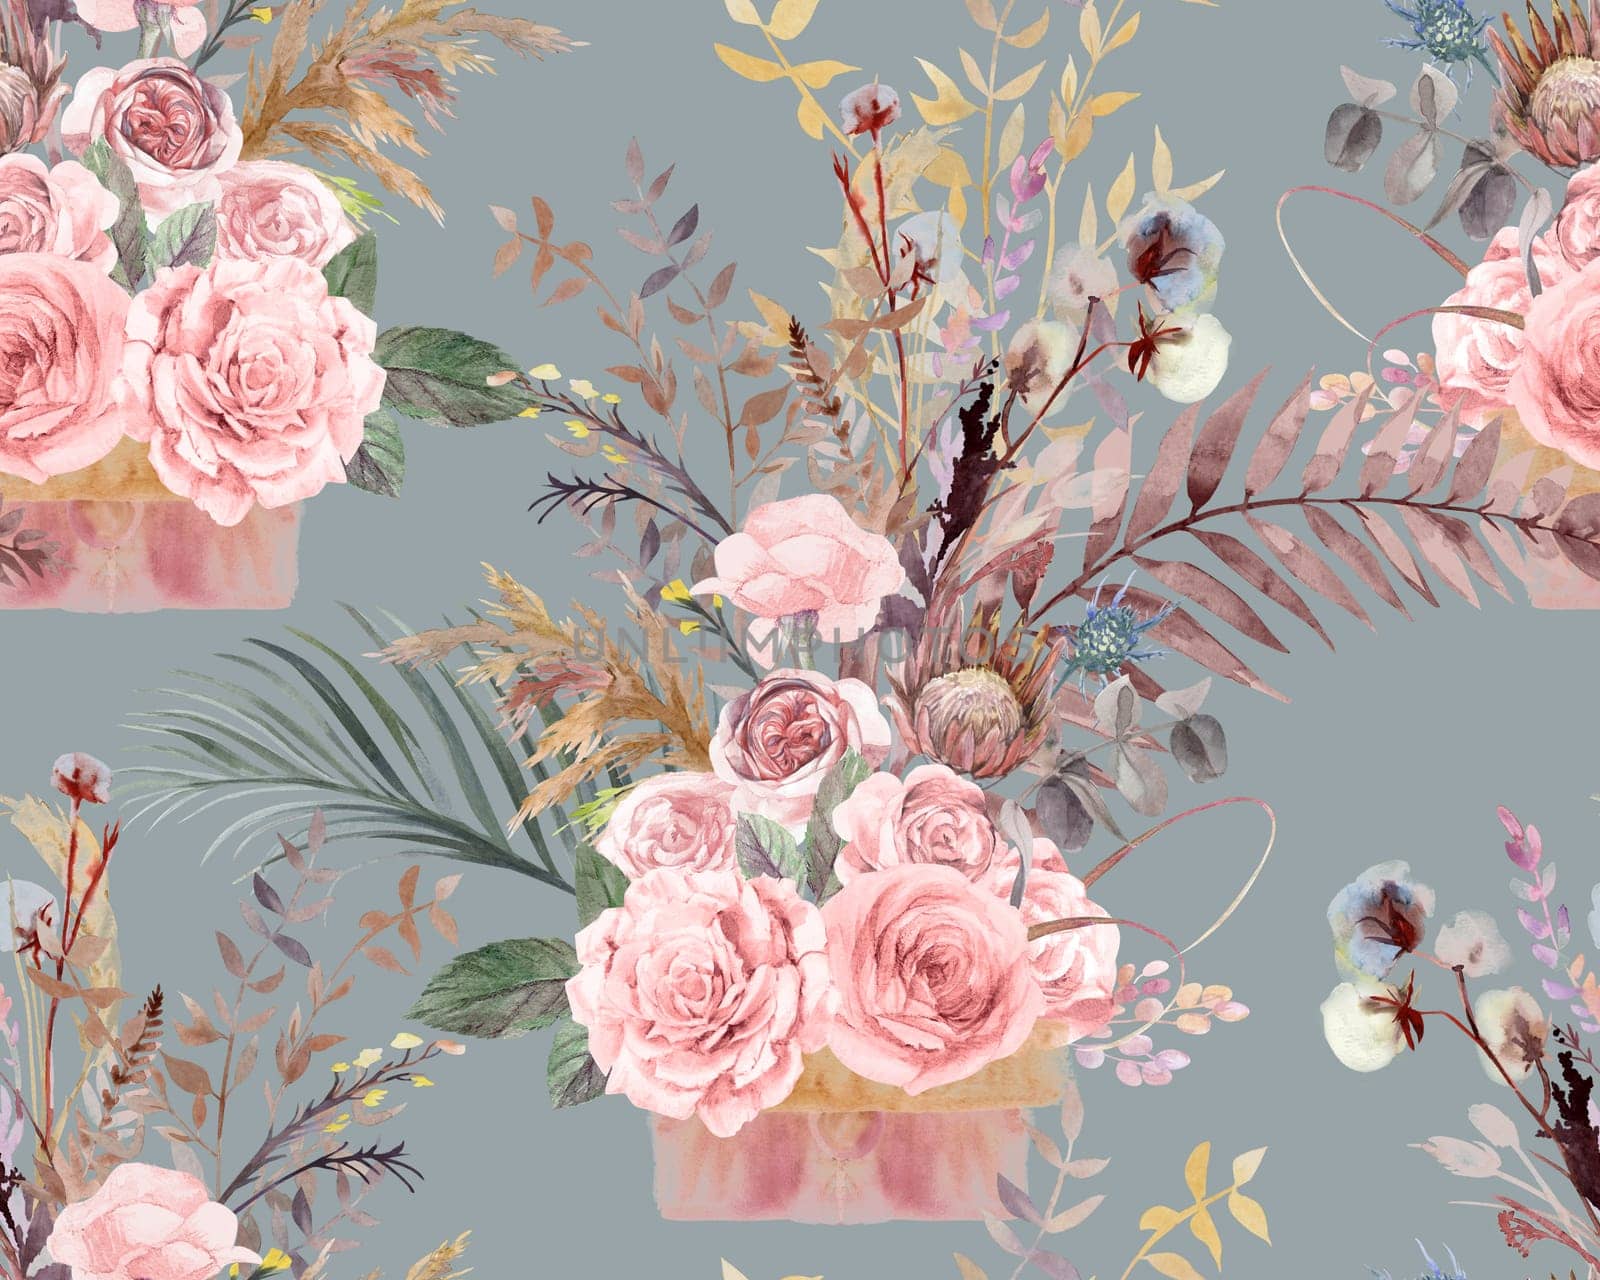 Seamless botanical pattern with watercolor flowers of roses and palm leaves